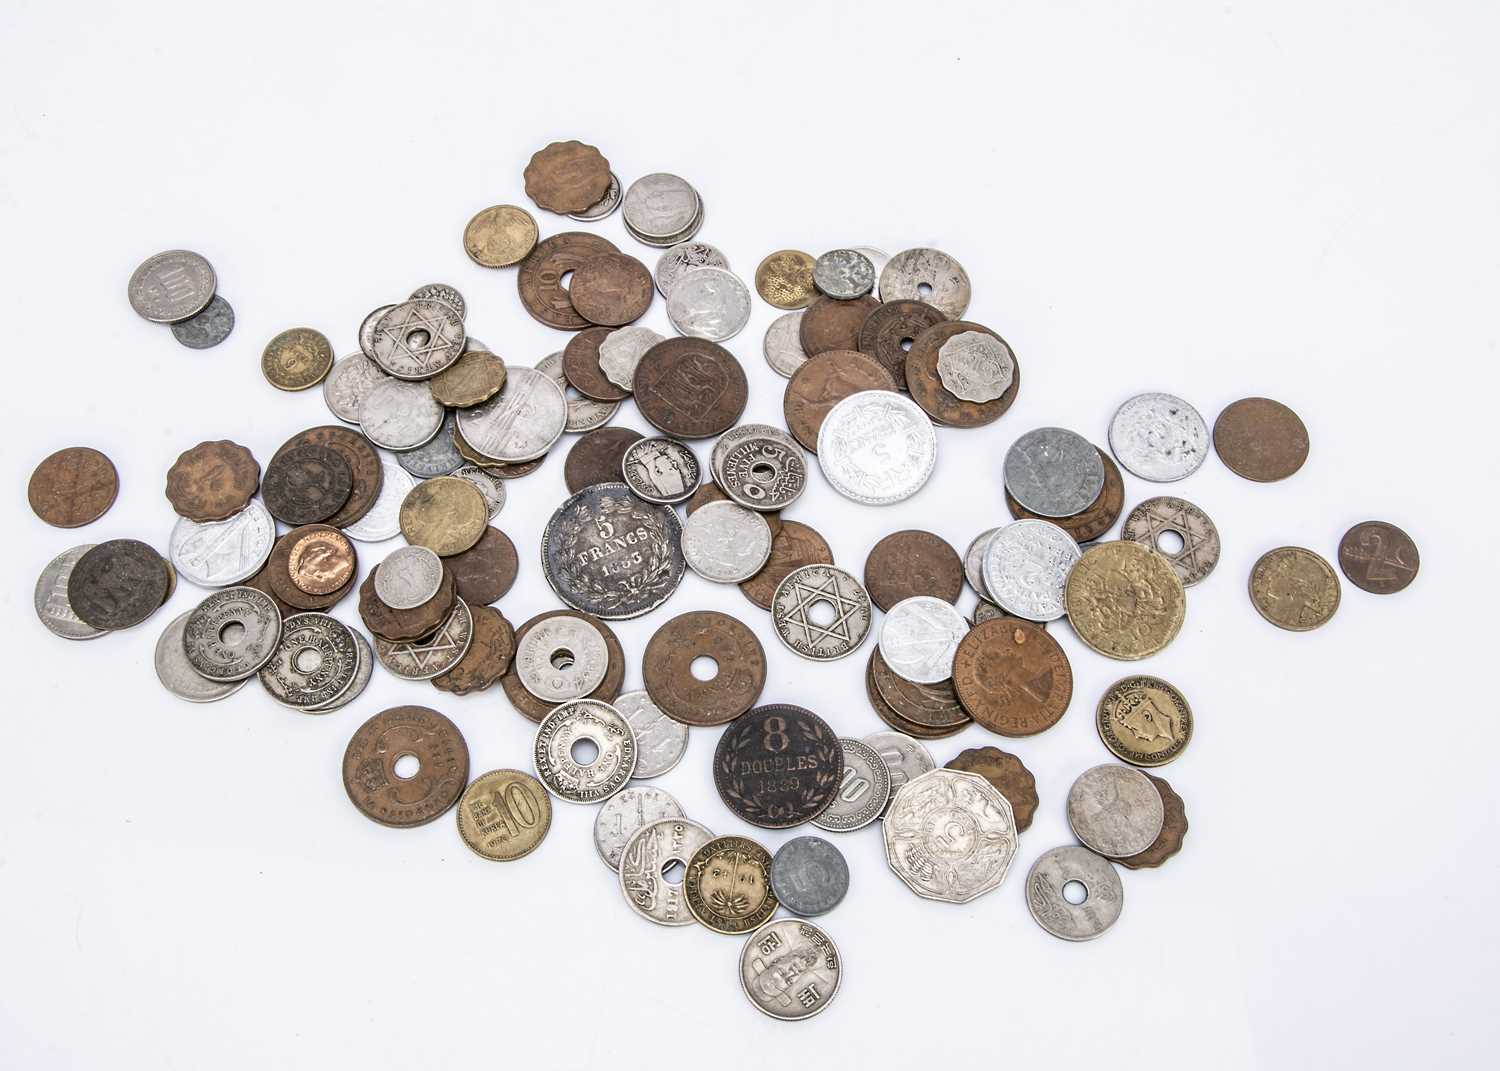 A small bag of world coinage,